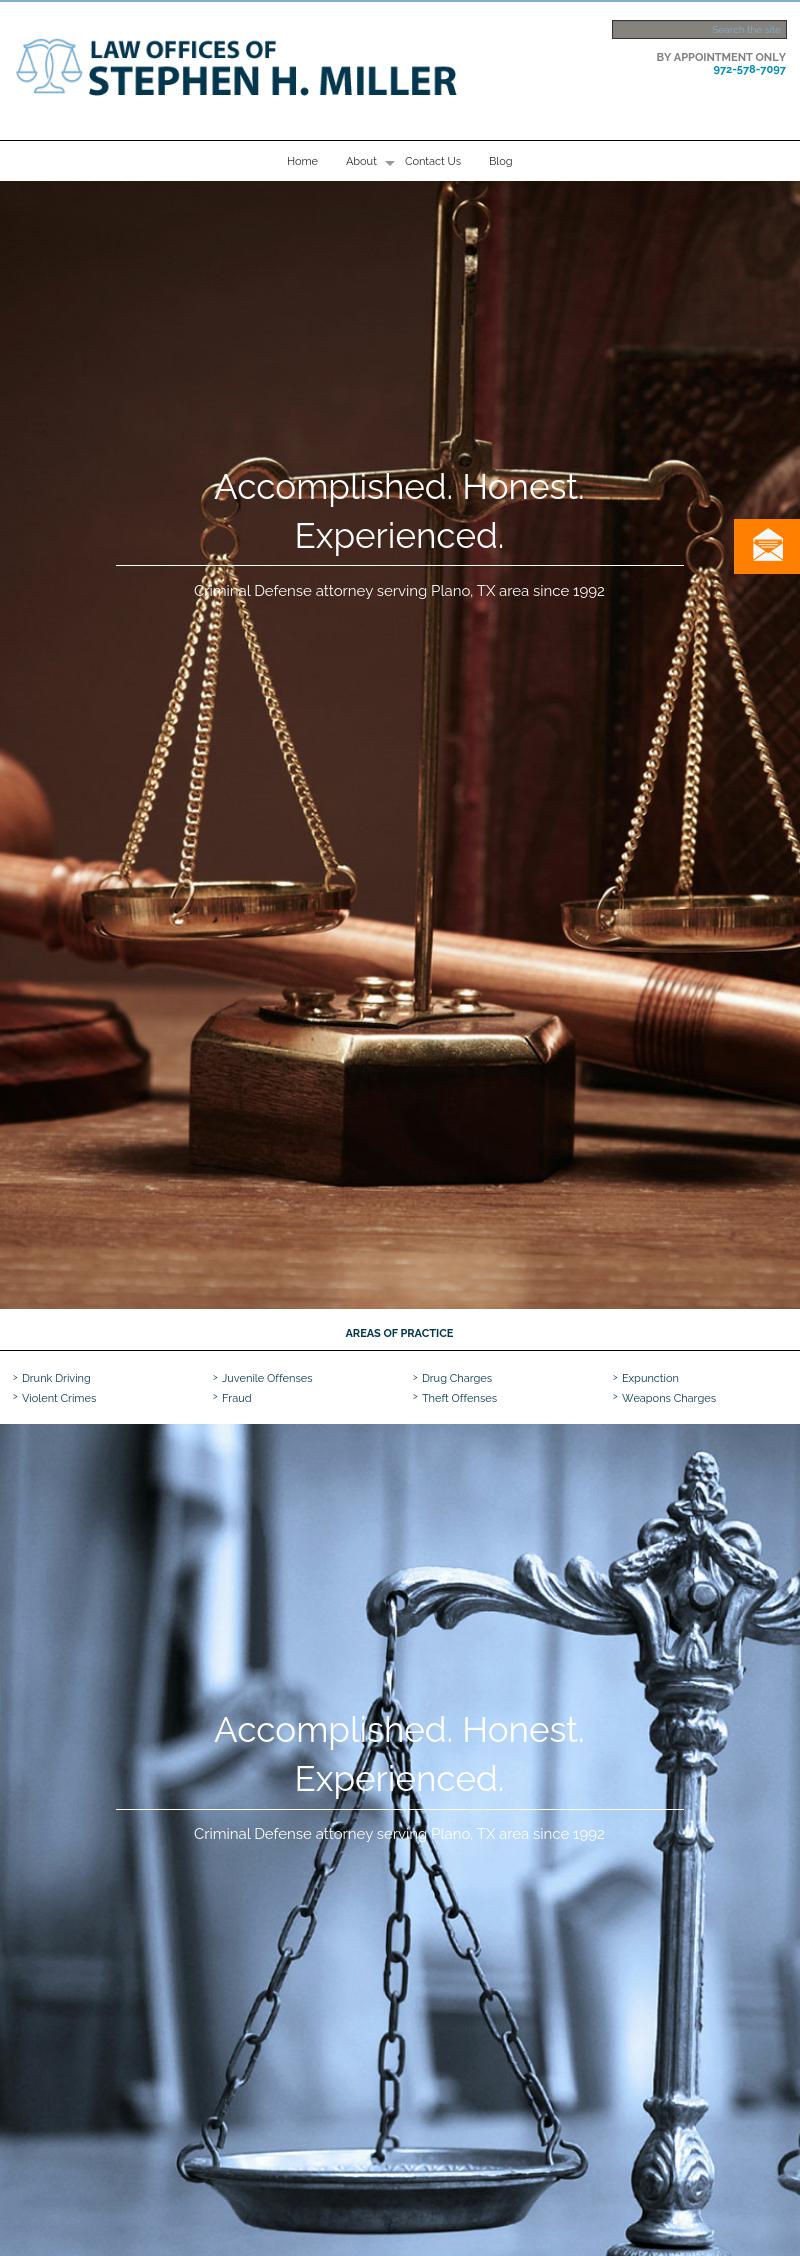 Stephen H. Miller - Plano TX Lawyers